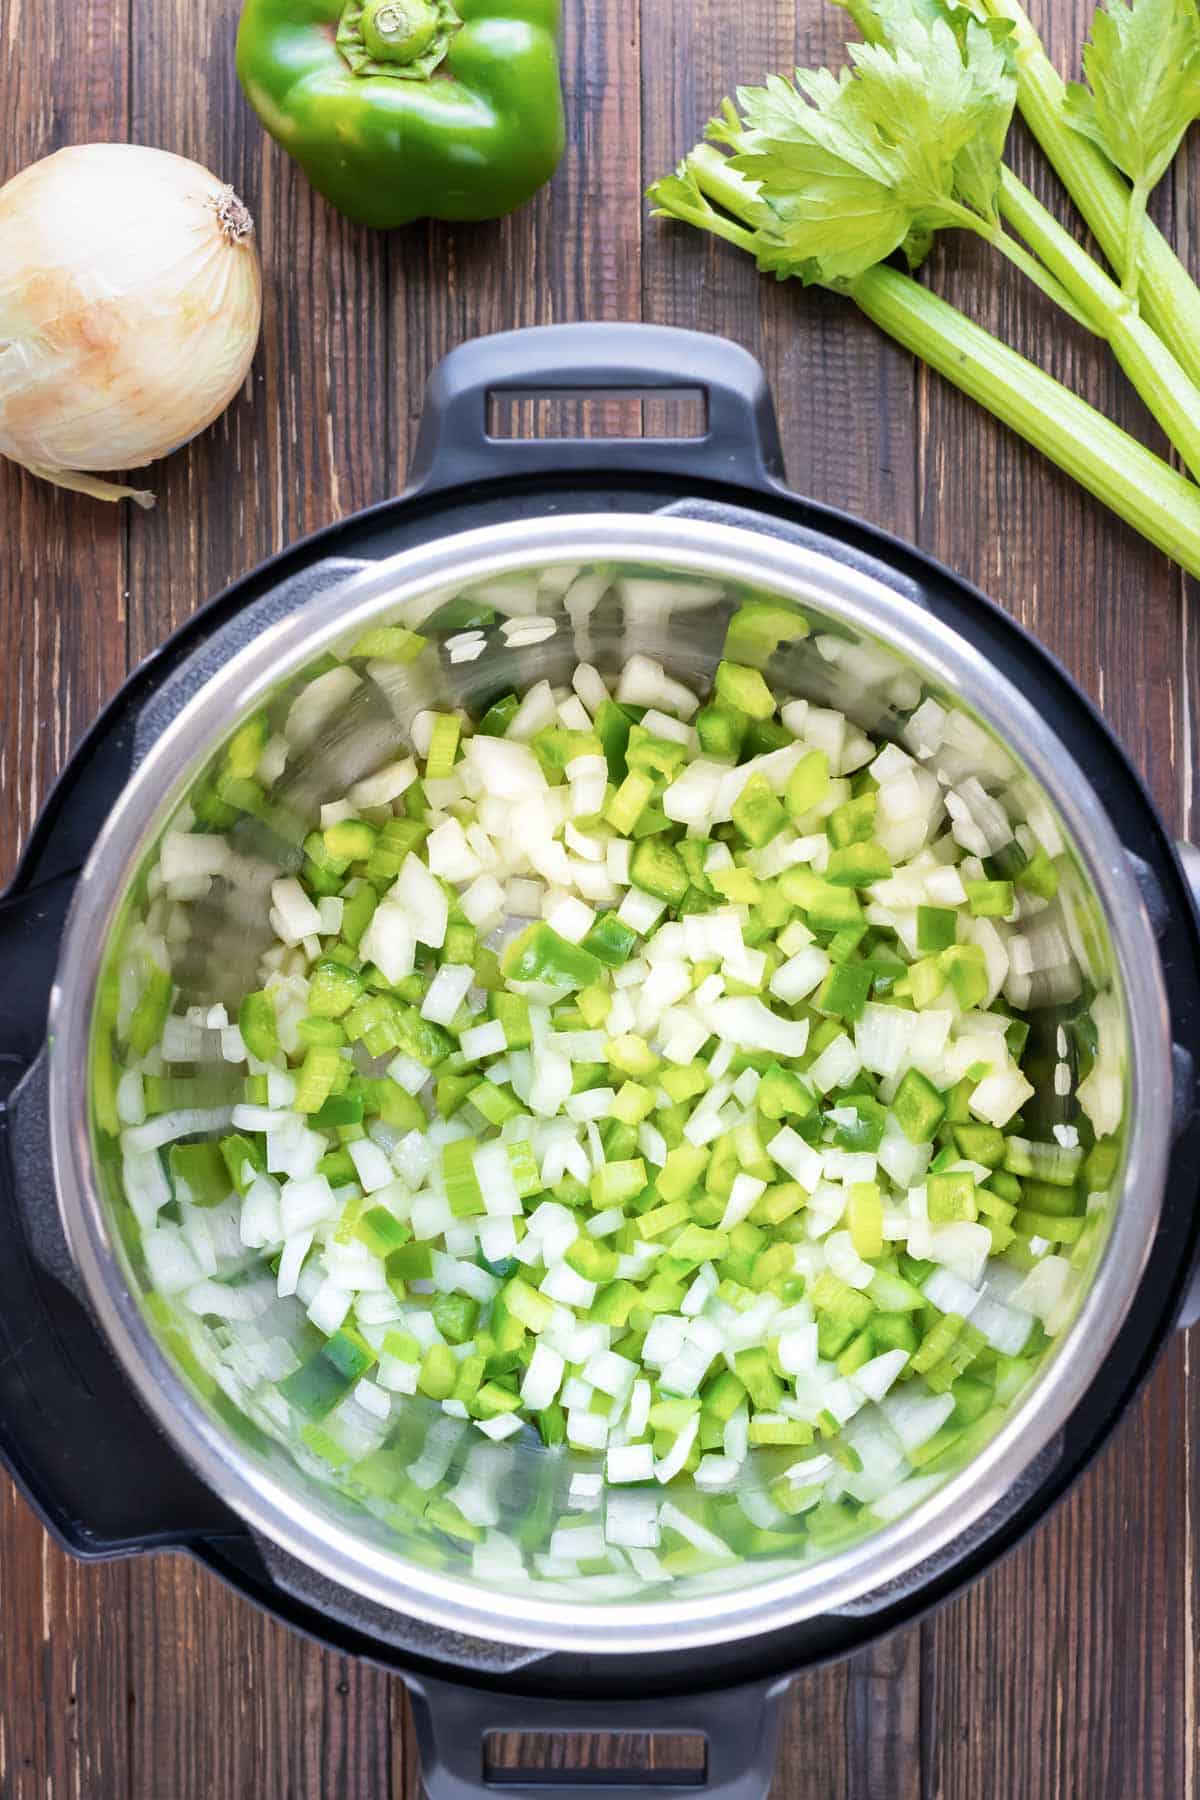 Onions, celery, and bell peppers are added to an Instant Pot.